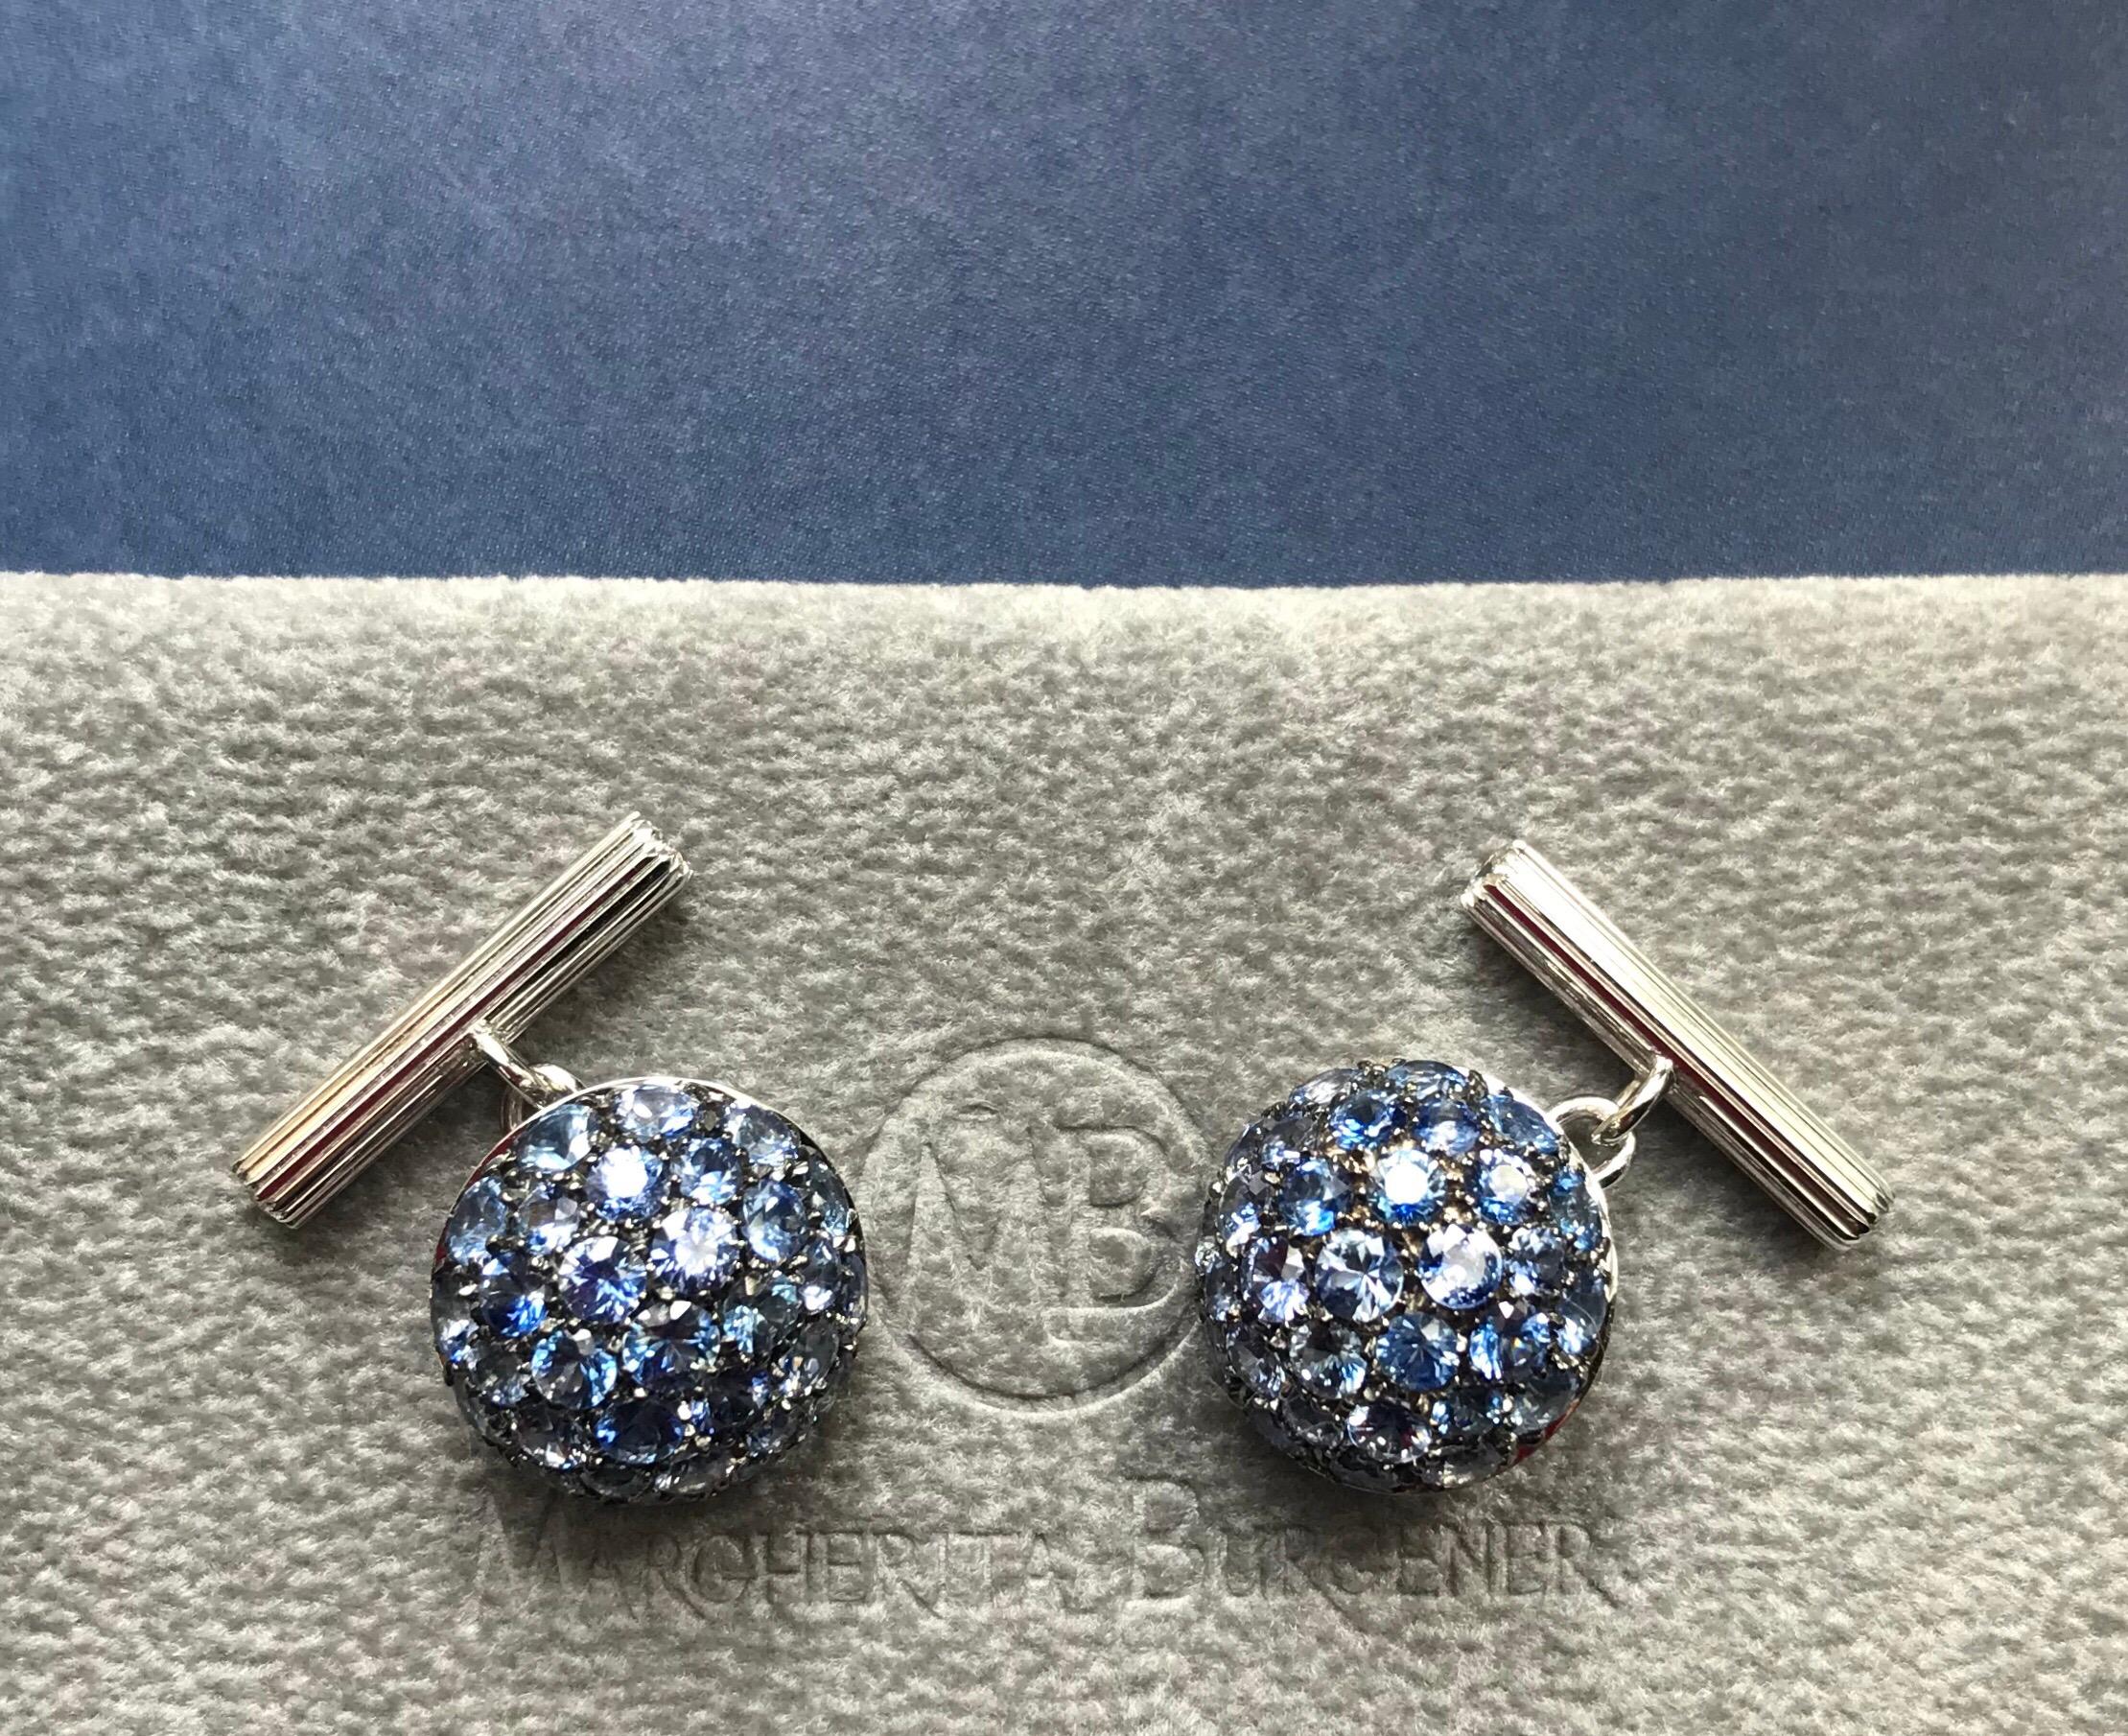 Round Cut Blue Sapphires Diamond 18 KT White Gold Boule Made in Italy Cufflinks